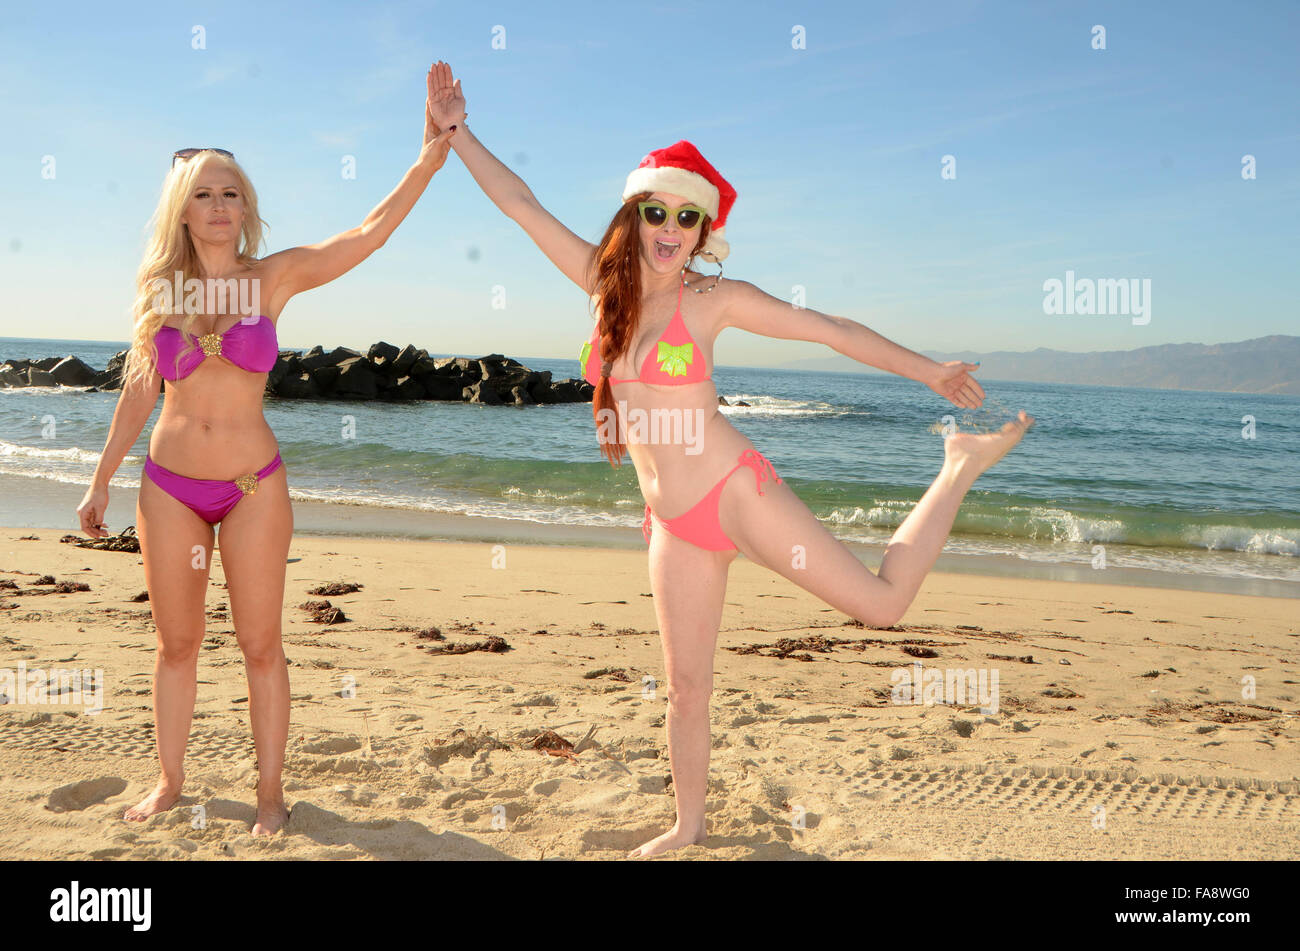 Phoebe Price and new BFF (Best Friend Forever) Ana Braga pose together  during a photoshoot on Venice Beach Featuring: Phoebe Price, Ana Braga  Where: Venice, California, United States When: 18 Nov 2015